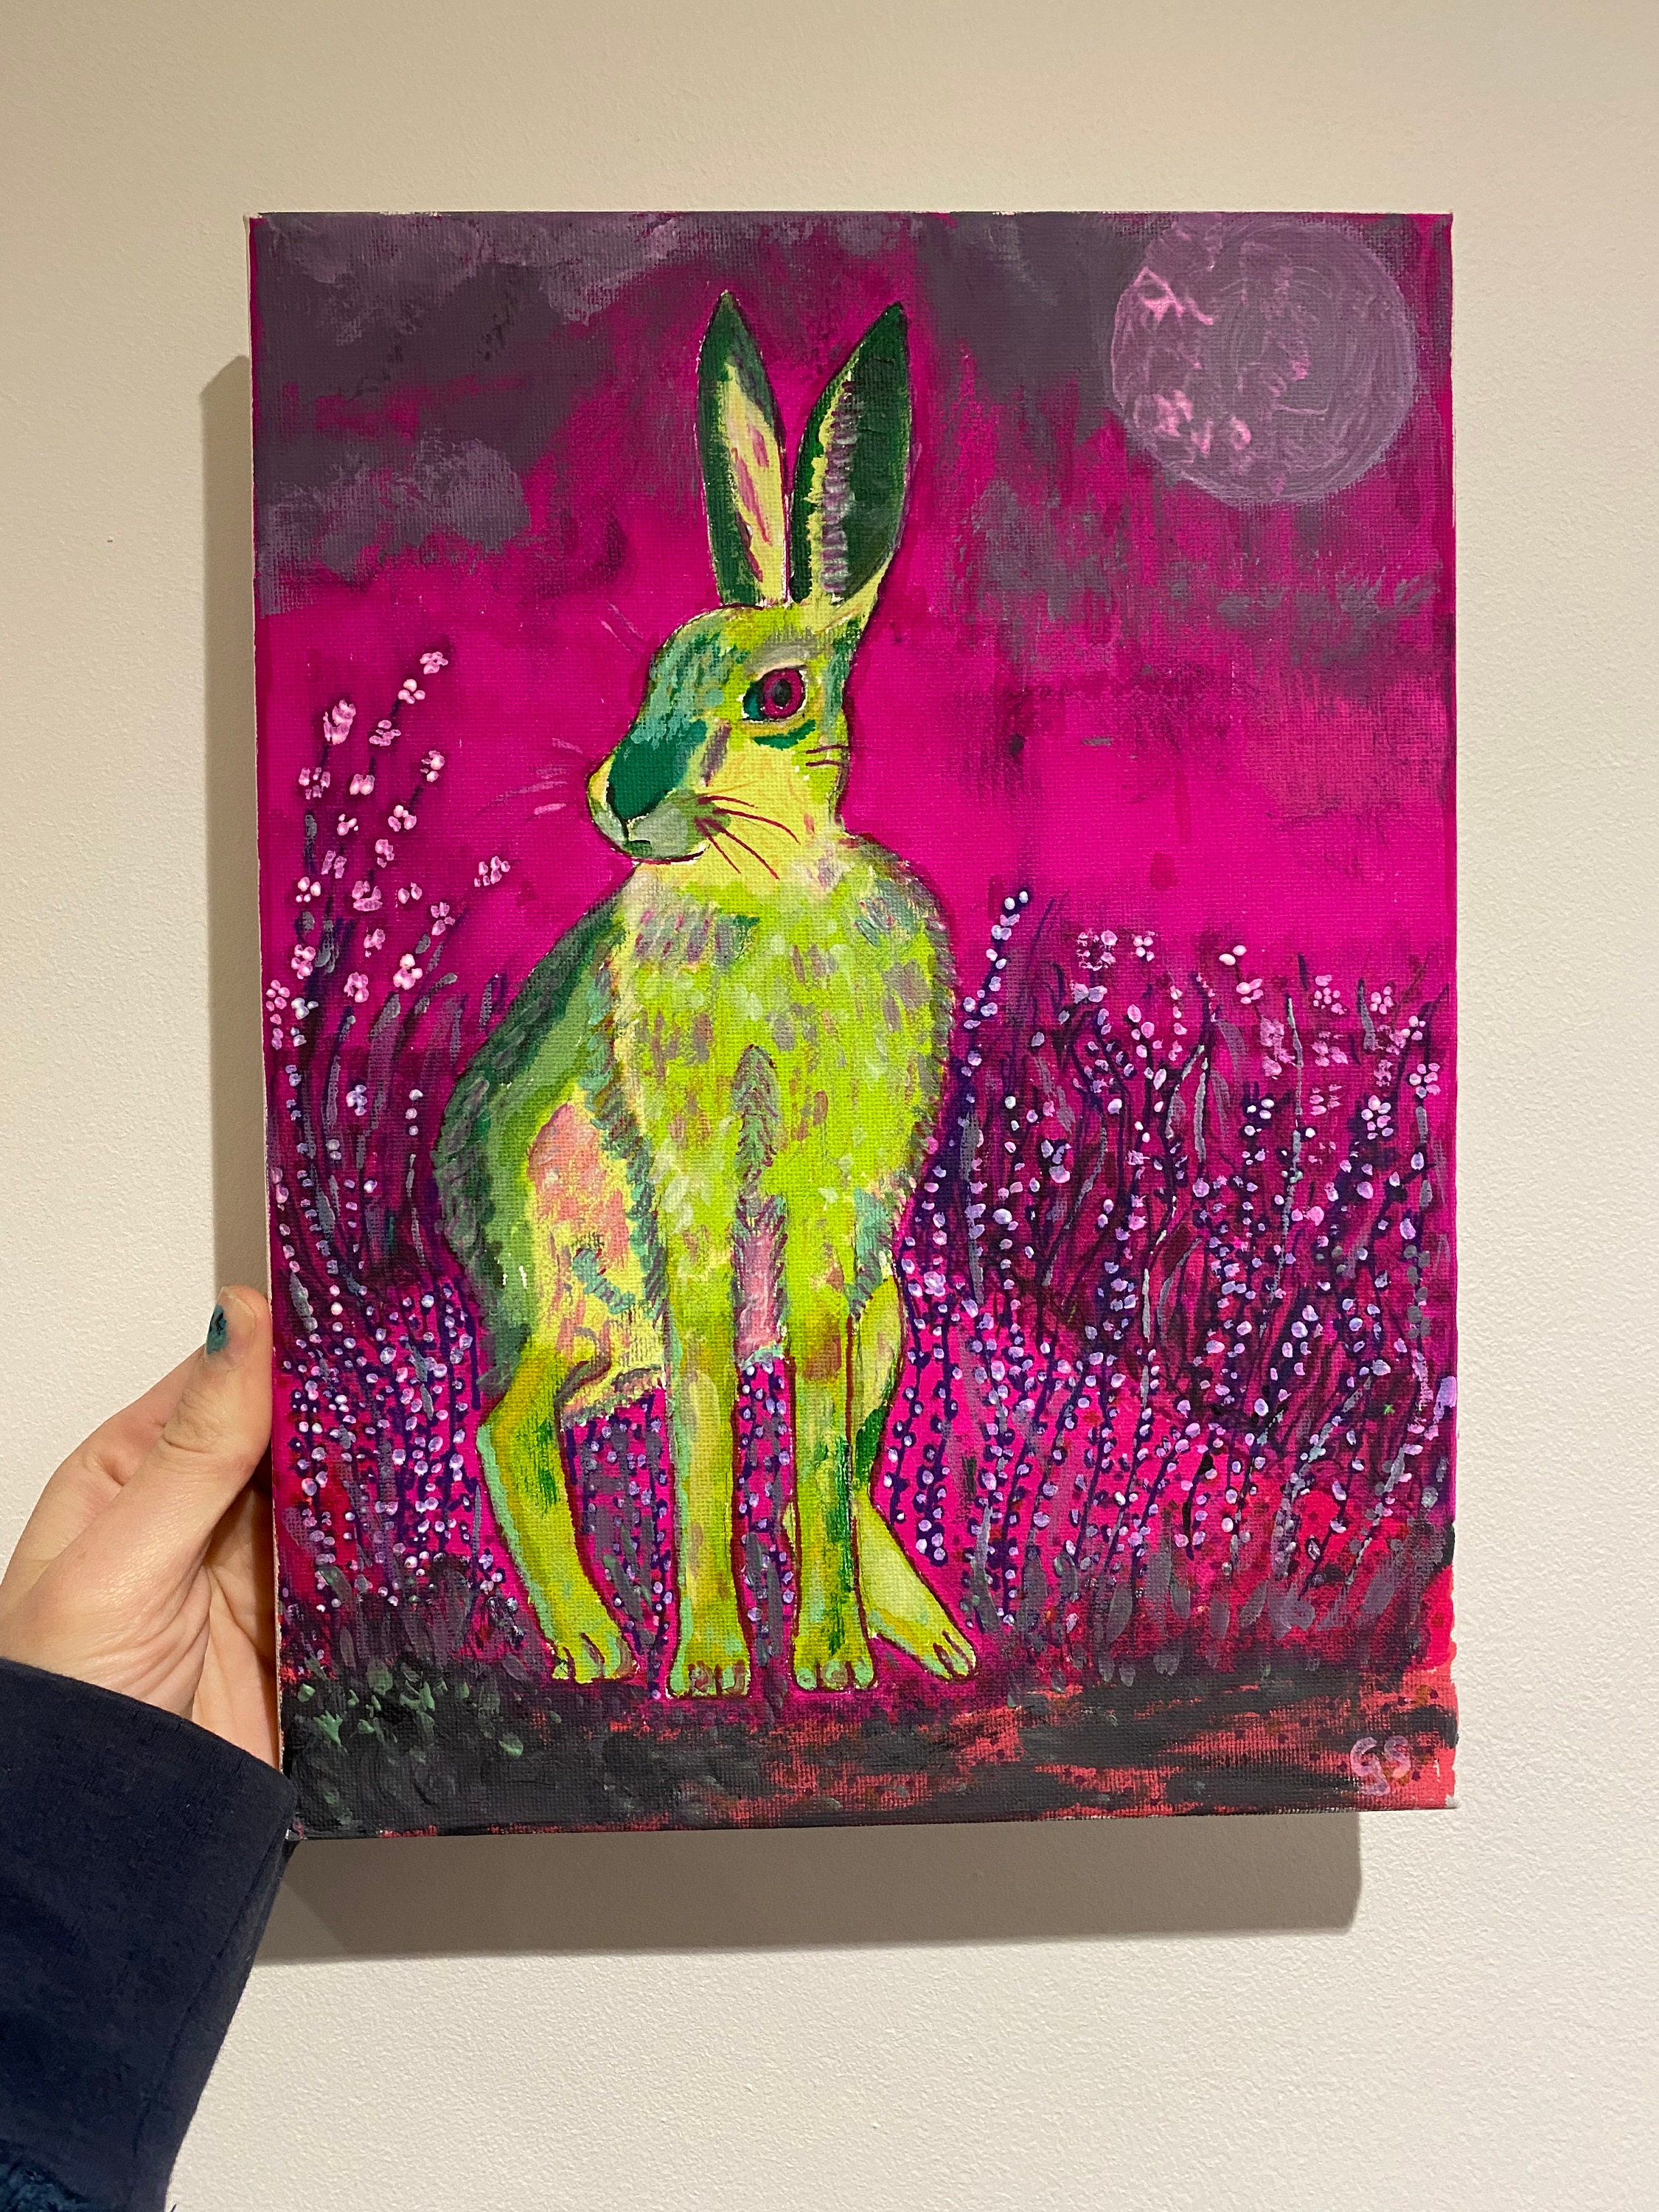 Striking pink and green colourful hare painting on canvas